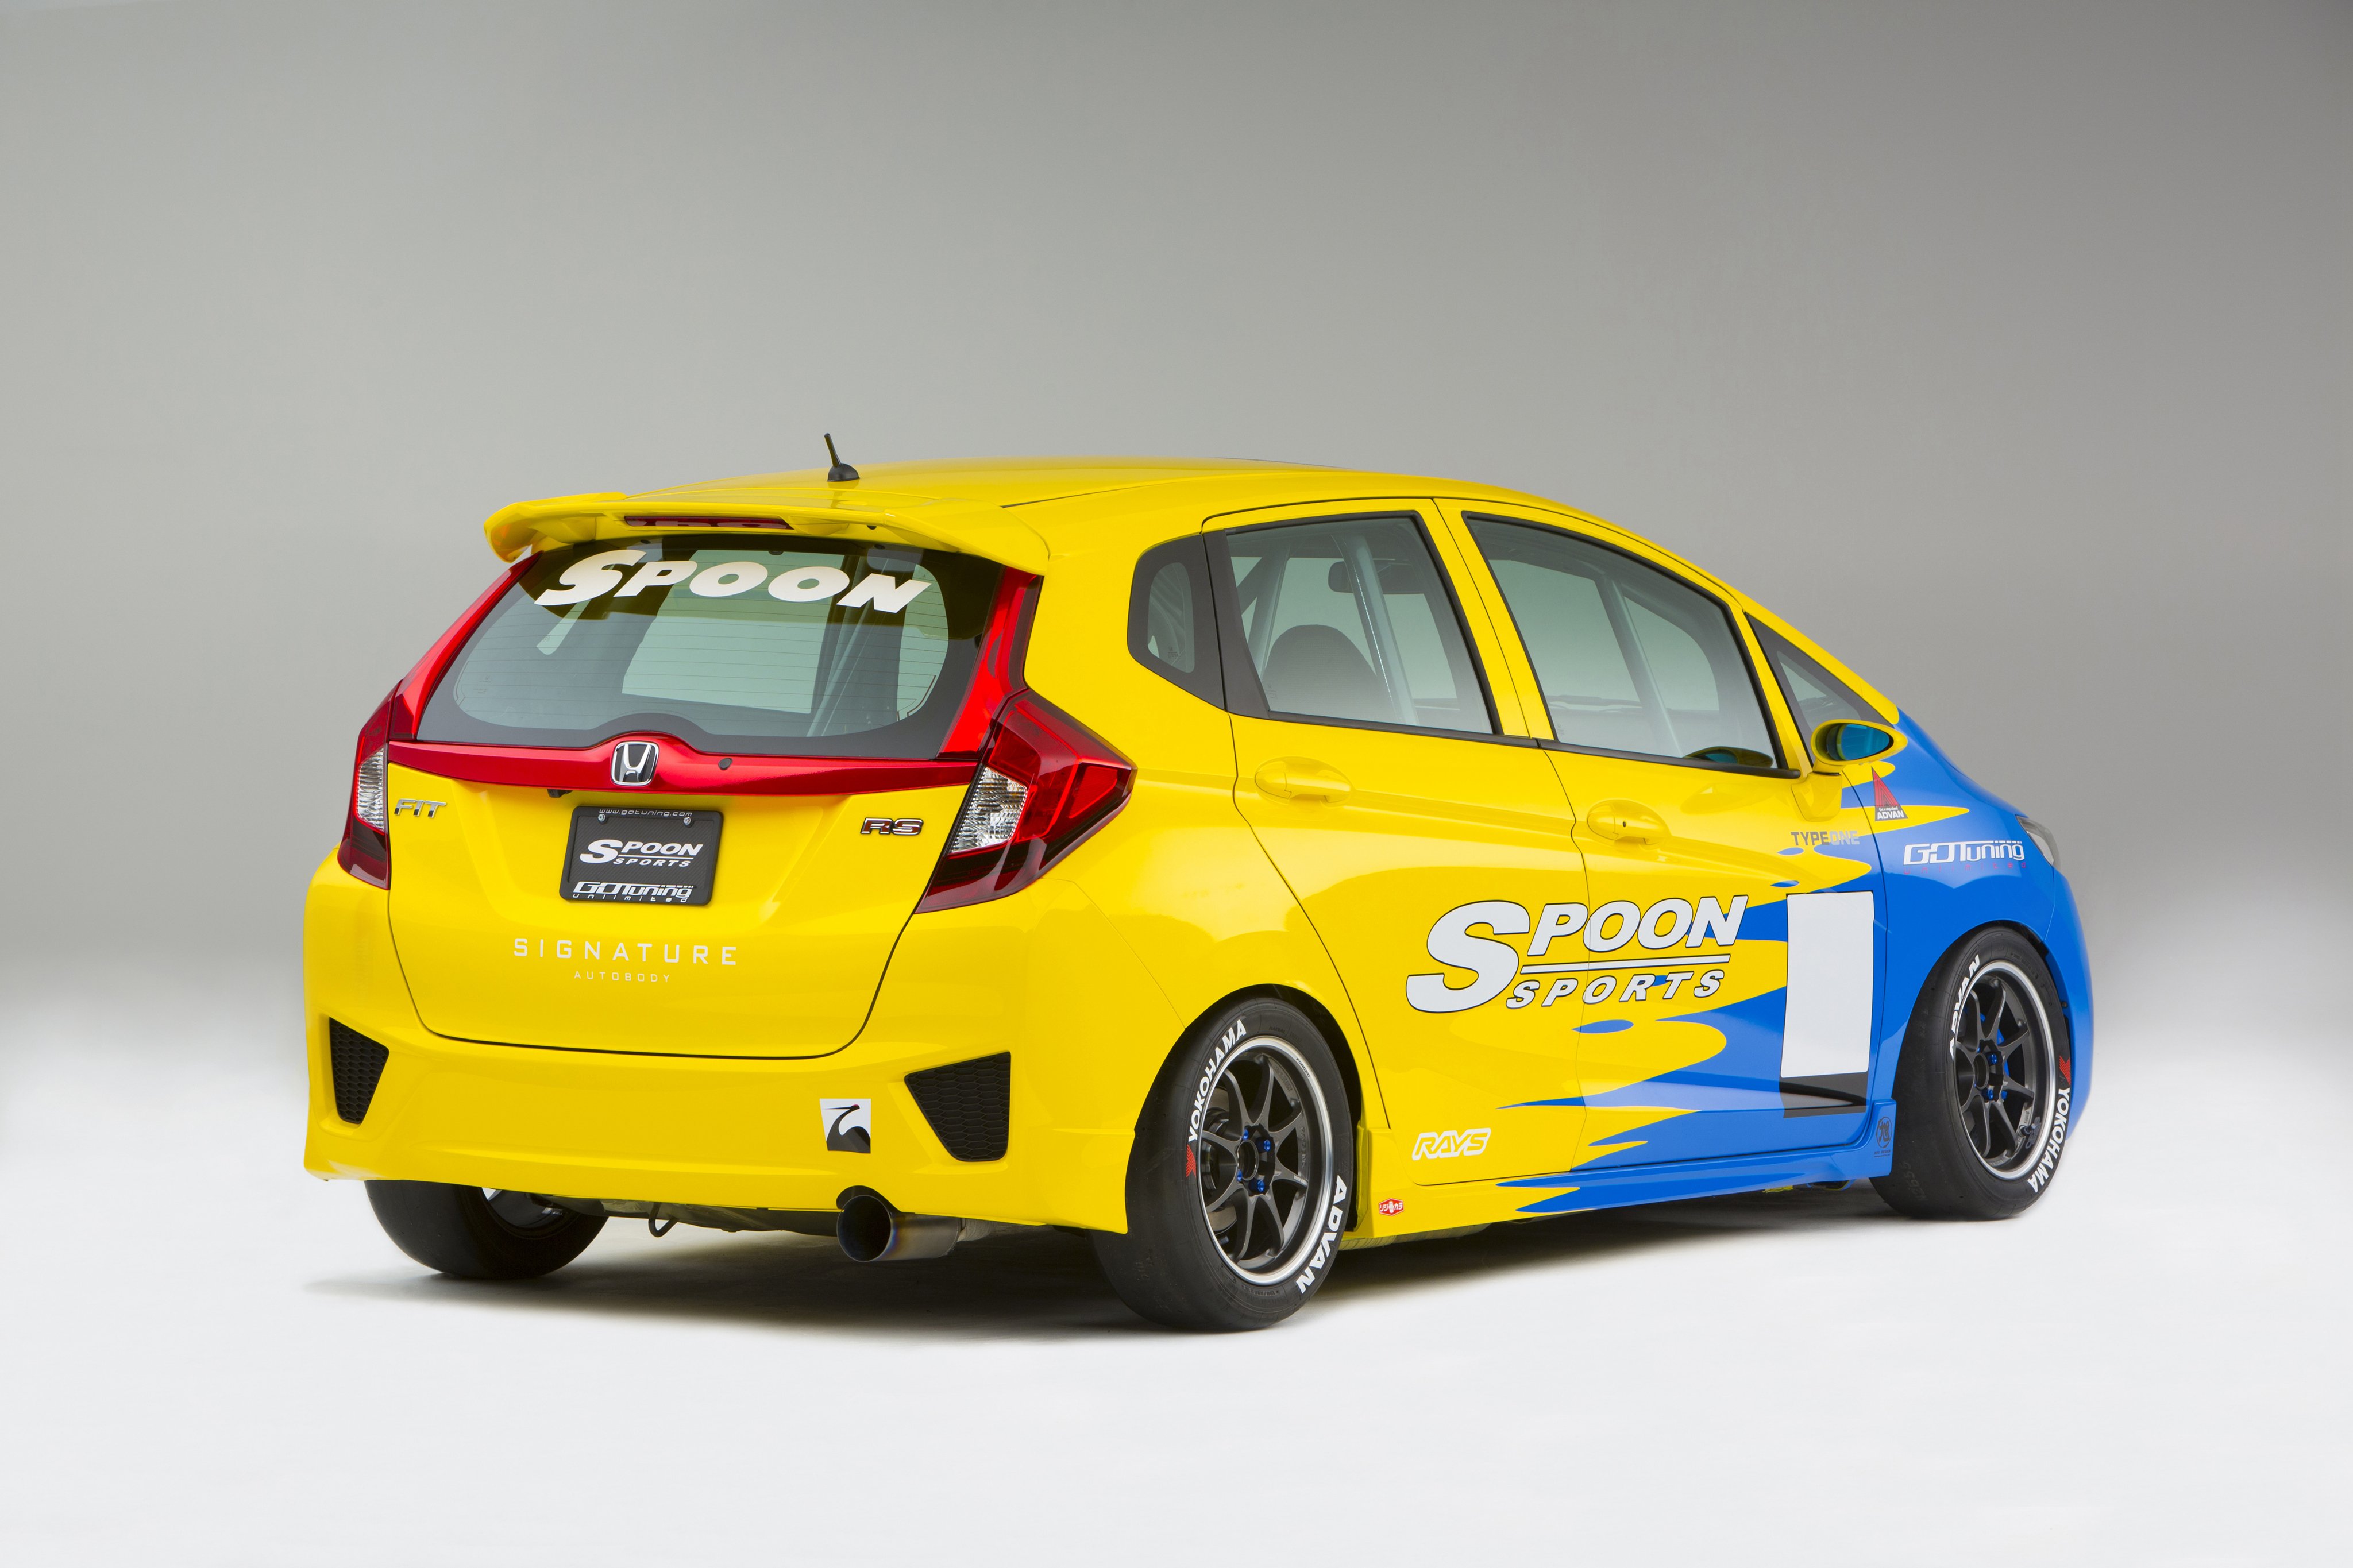 Spoon sports, Honda, Fit, Super, Taikyu, Tuning Wallpaper HD / Desktop and Mobile Background